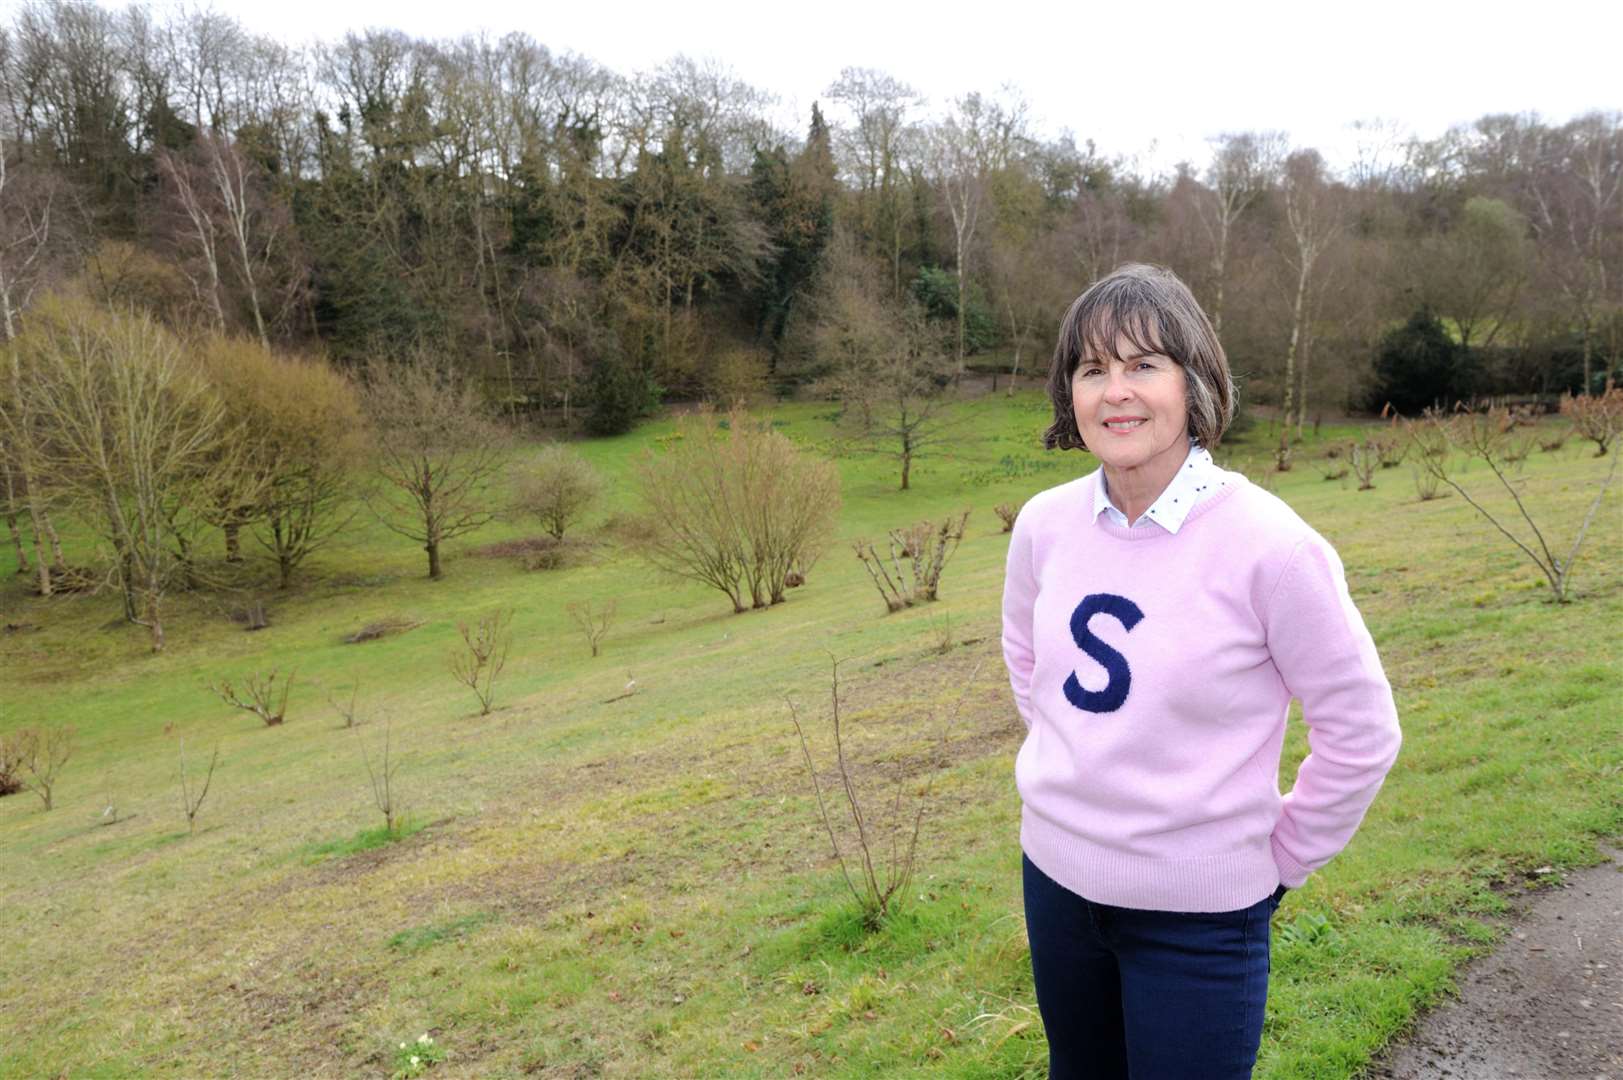 Sue Robinson lives at the site of what might be the largest Roman ragstone quarry in the world